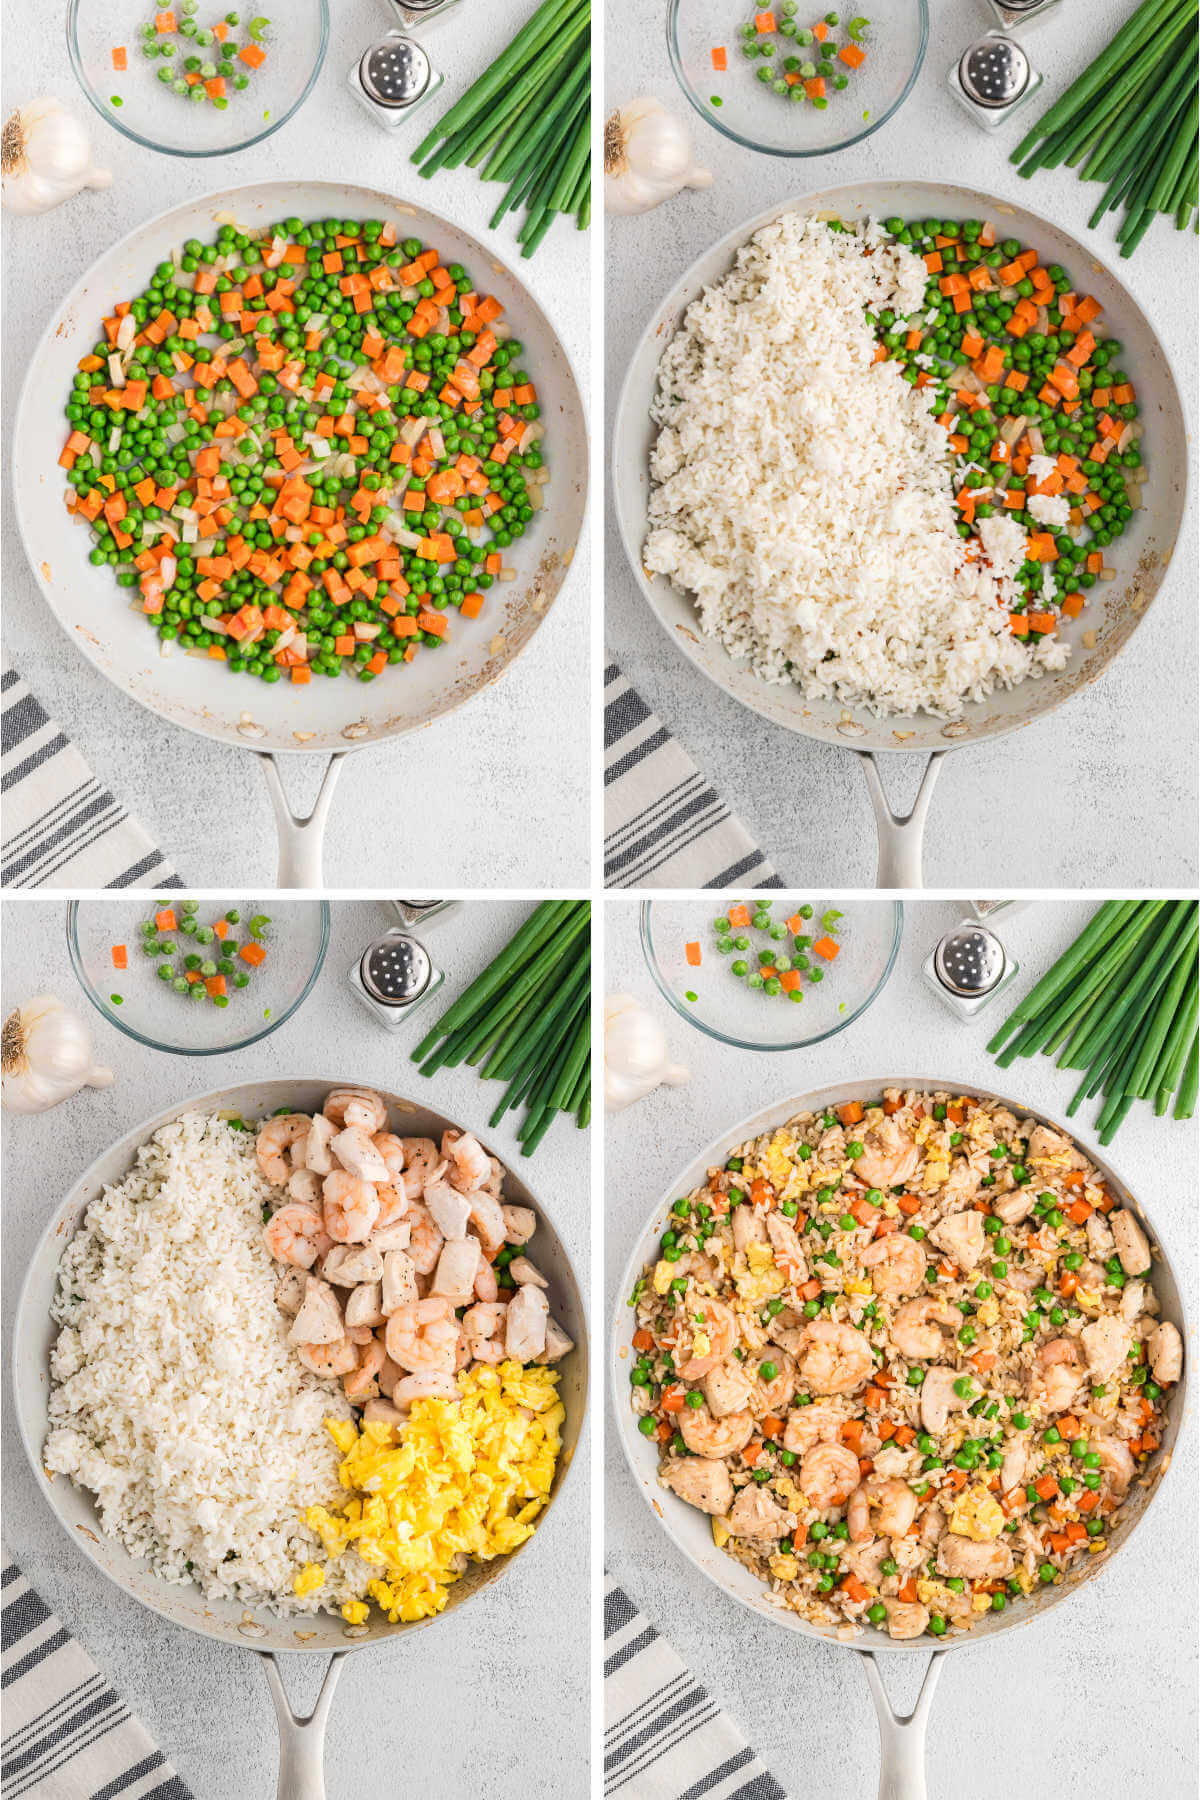 process steps for making fried rice with shrimp and chicken: peas, carrots, and rice added to the stir fry.